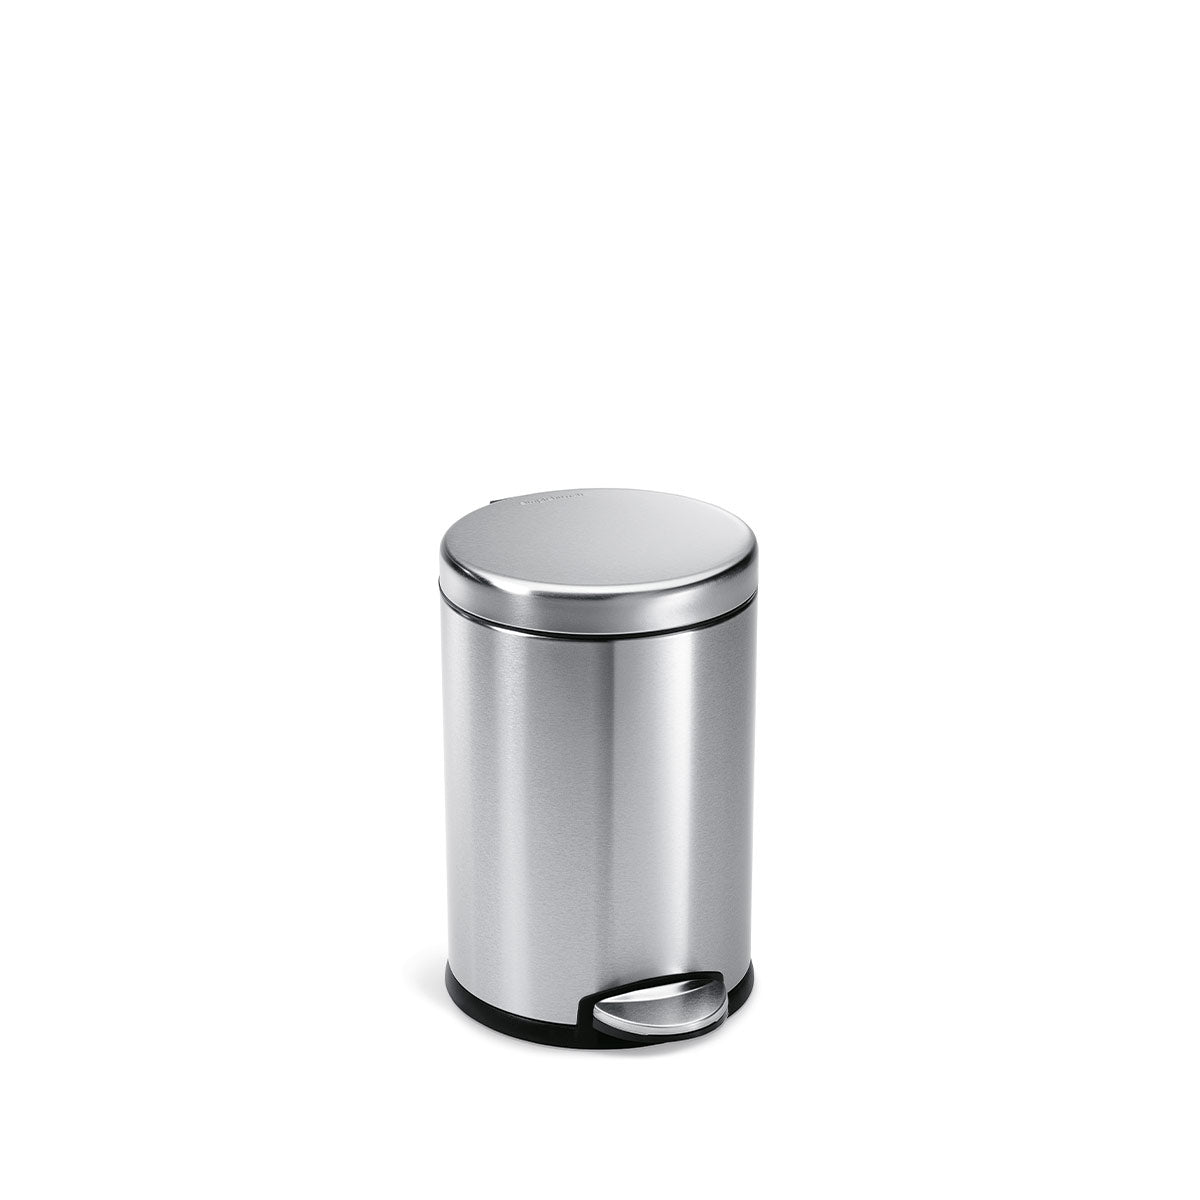 Trash can with pedal, 4.5 L, stainless steel - simplehuman